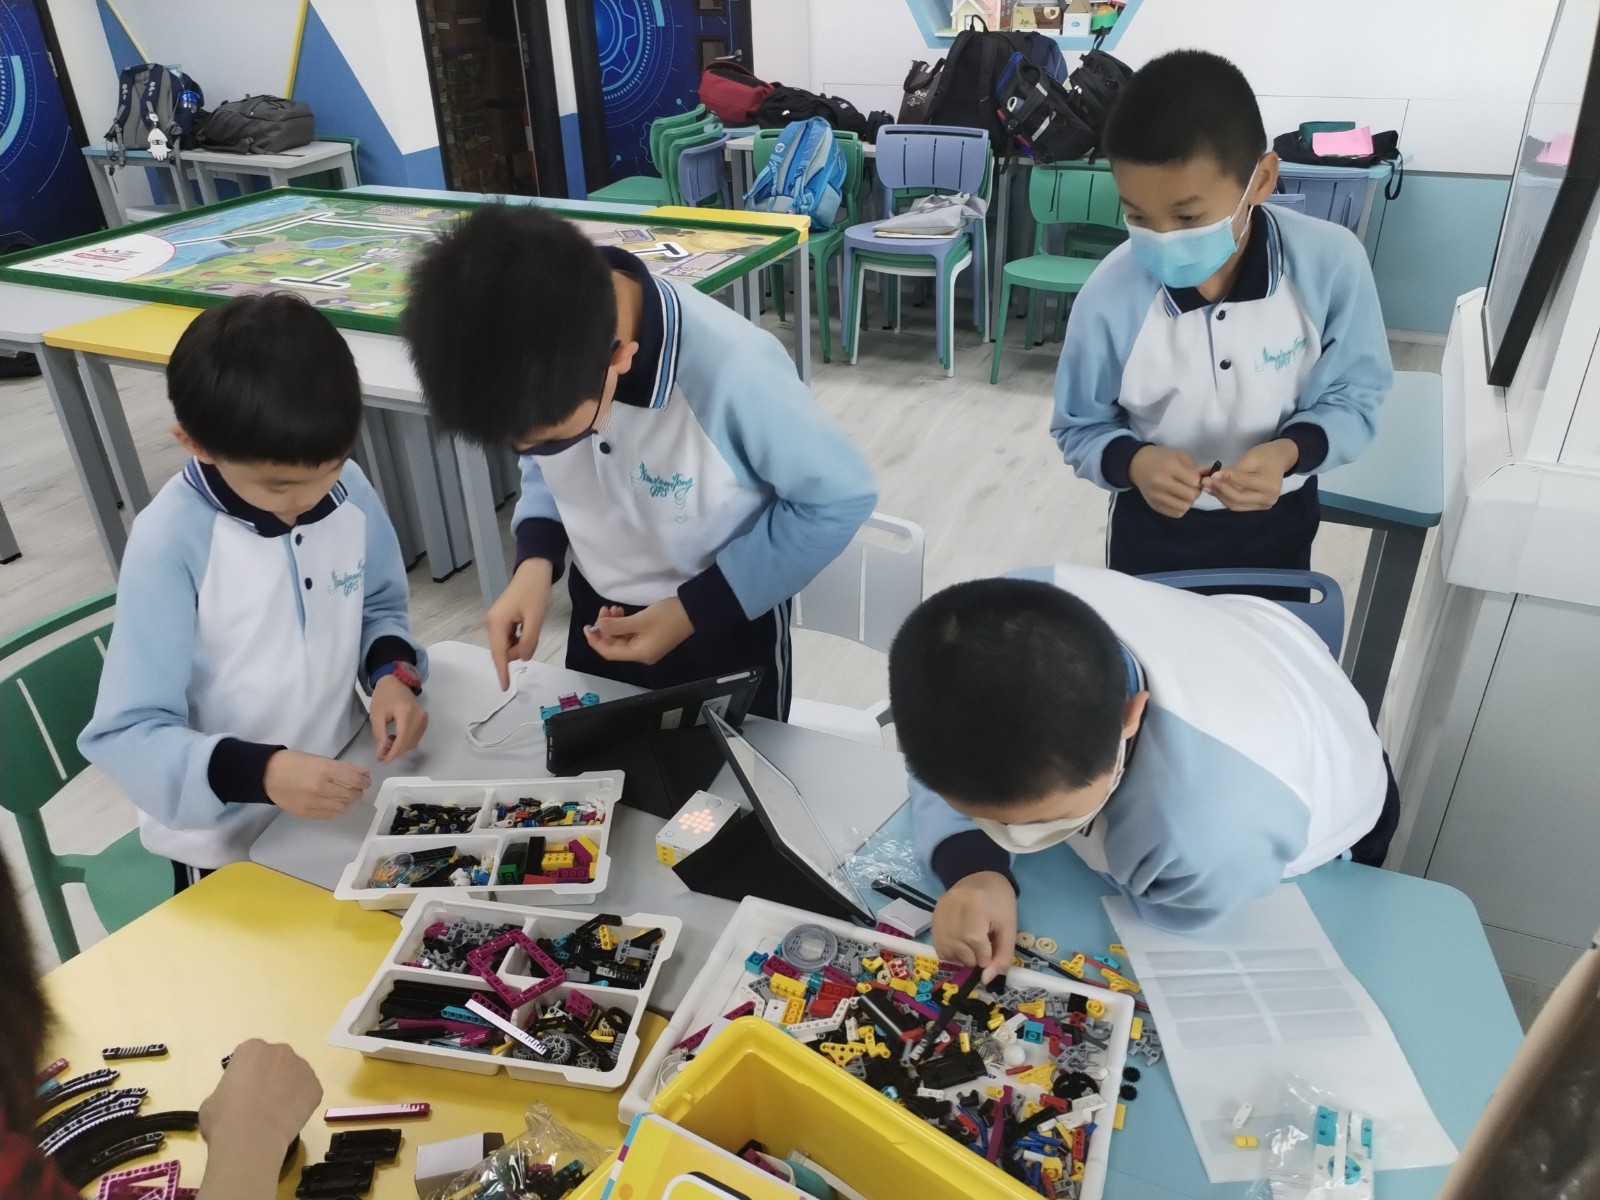 FIRST LEGO League Challenge Competition Training Course - Kowloon Tong Government Primary School